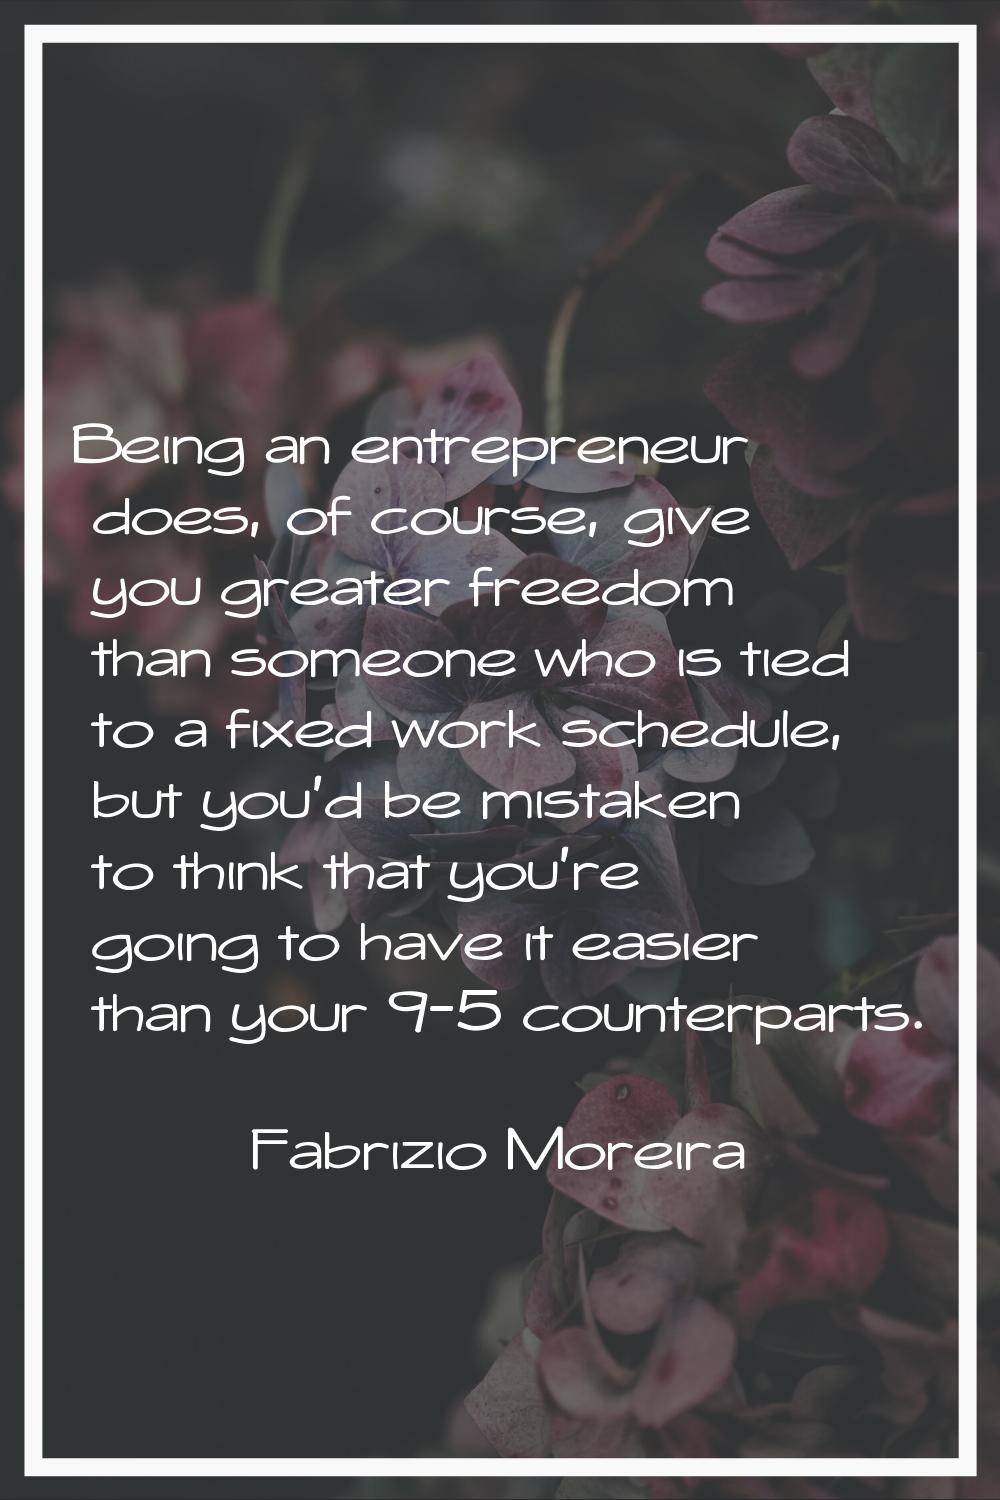 Being an entrepreneur does, of course, give you greater freedom than someone who is tied to a fixed